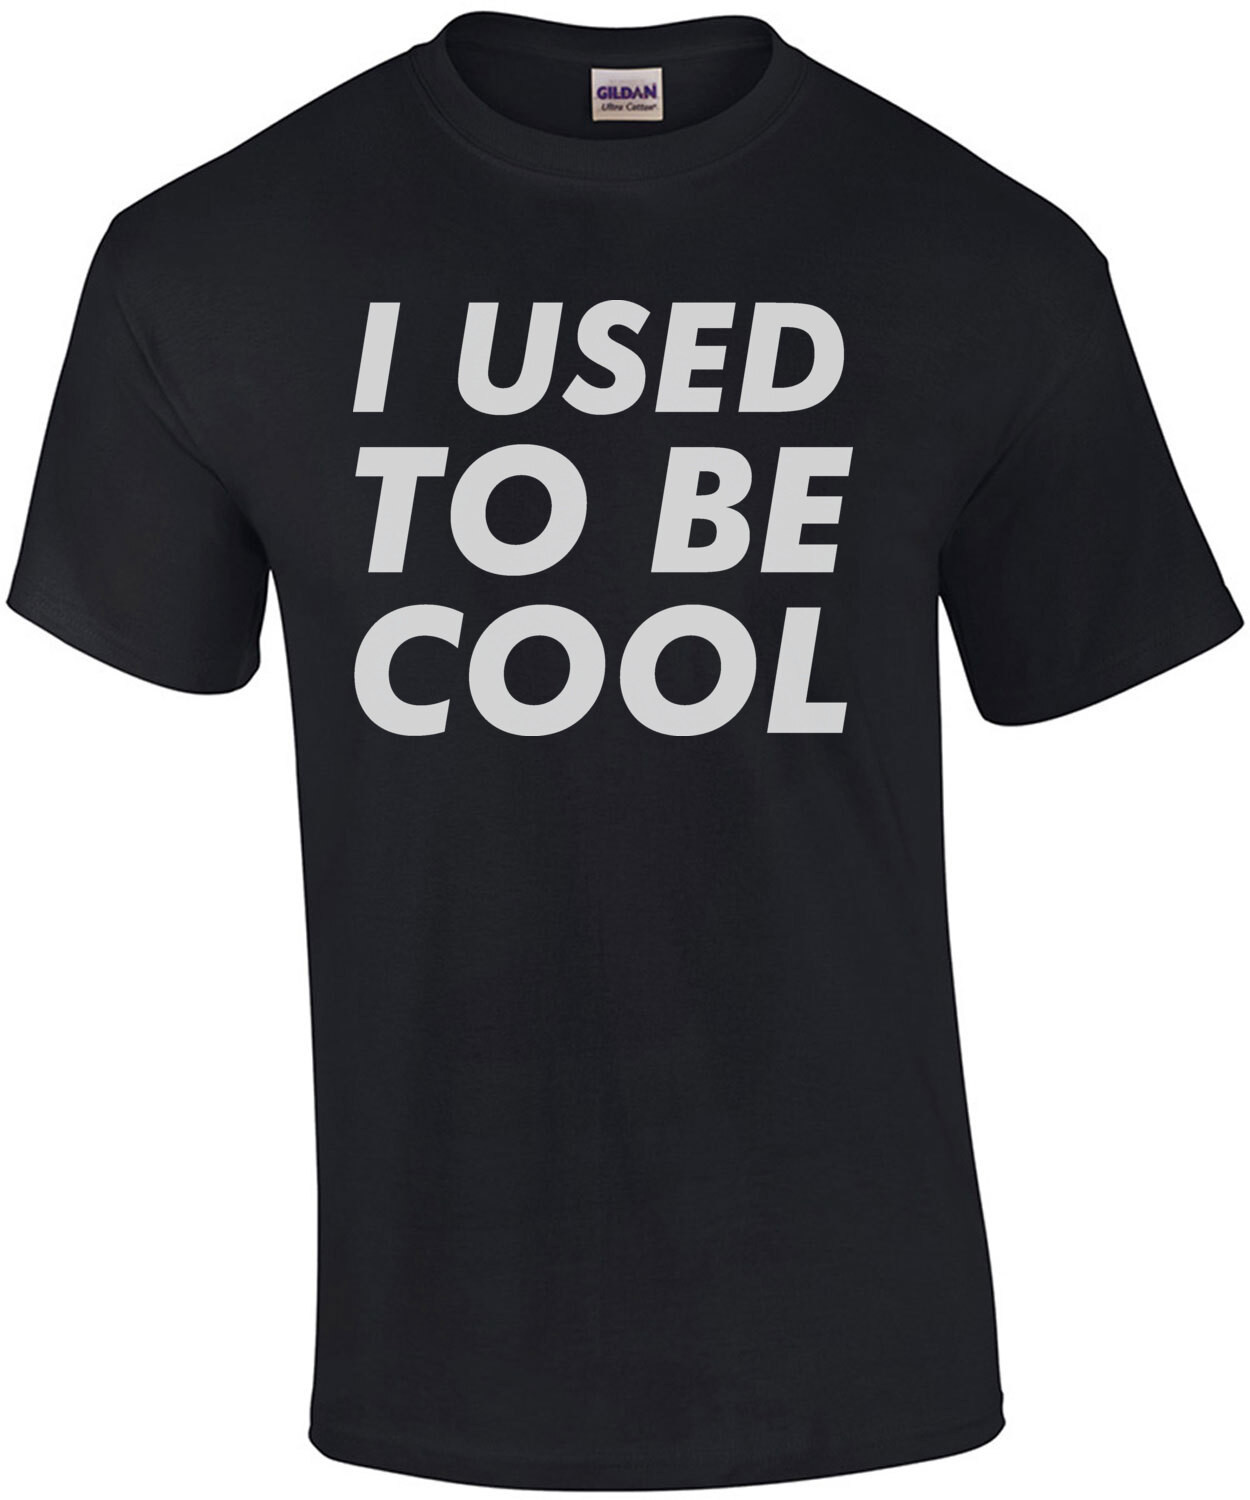 I used to be cool - funny sarcastic t-shirt